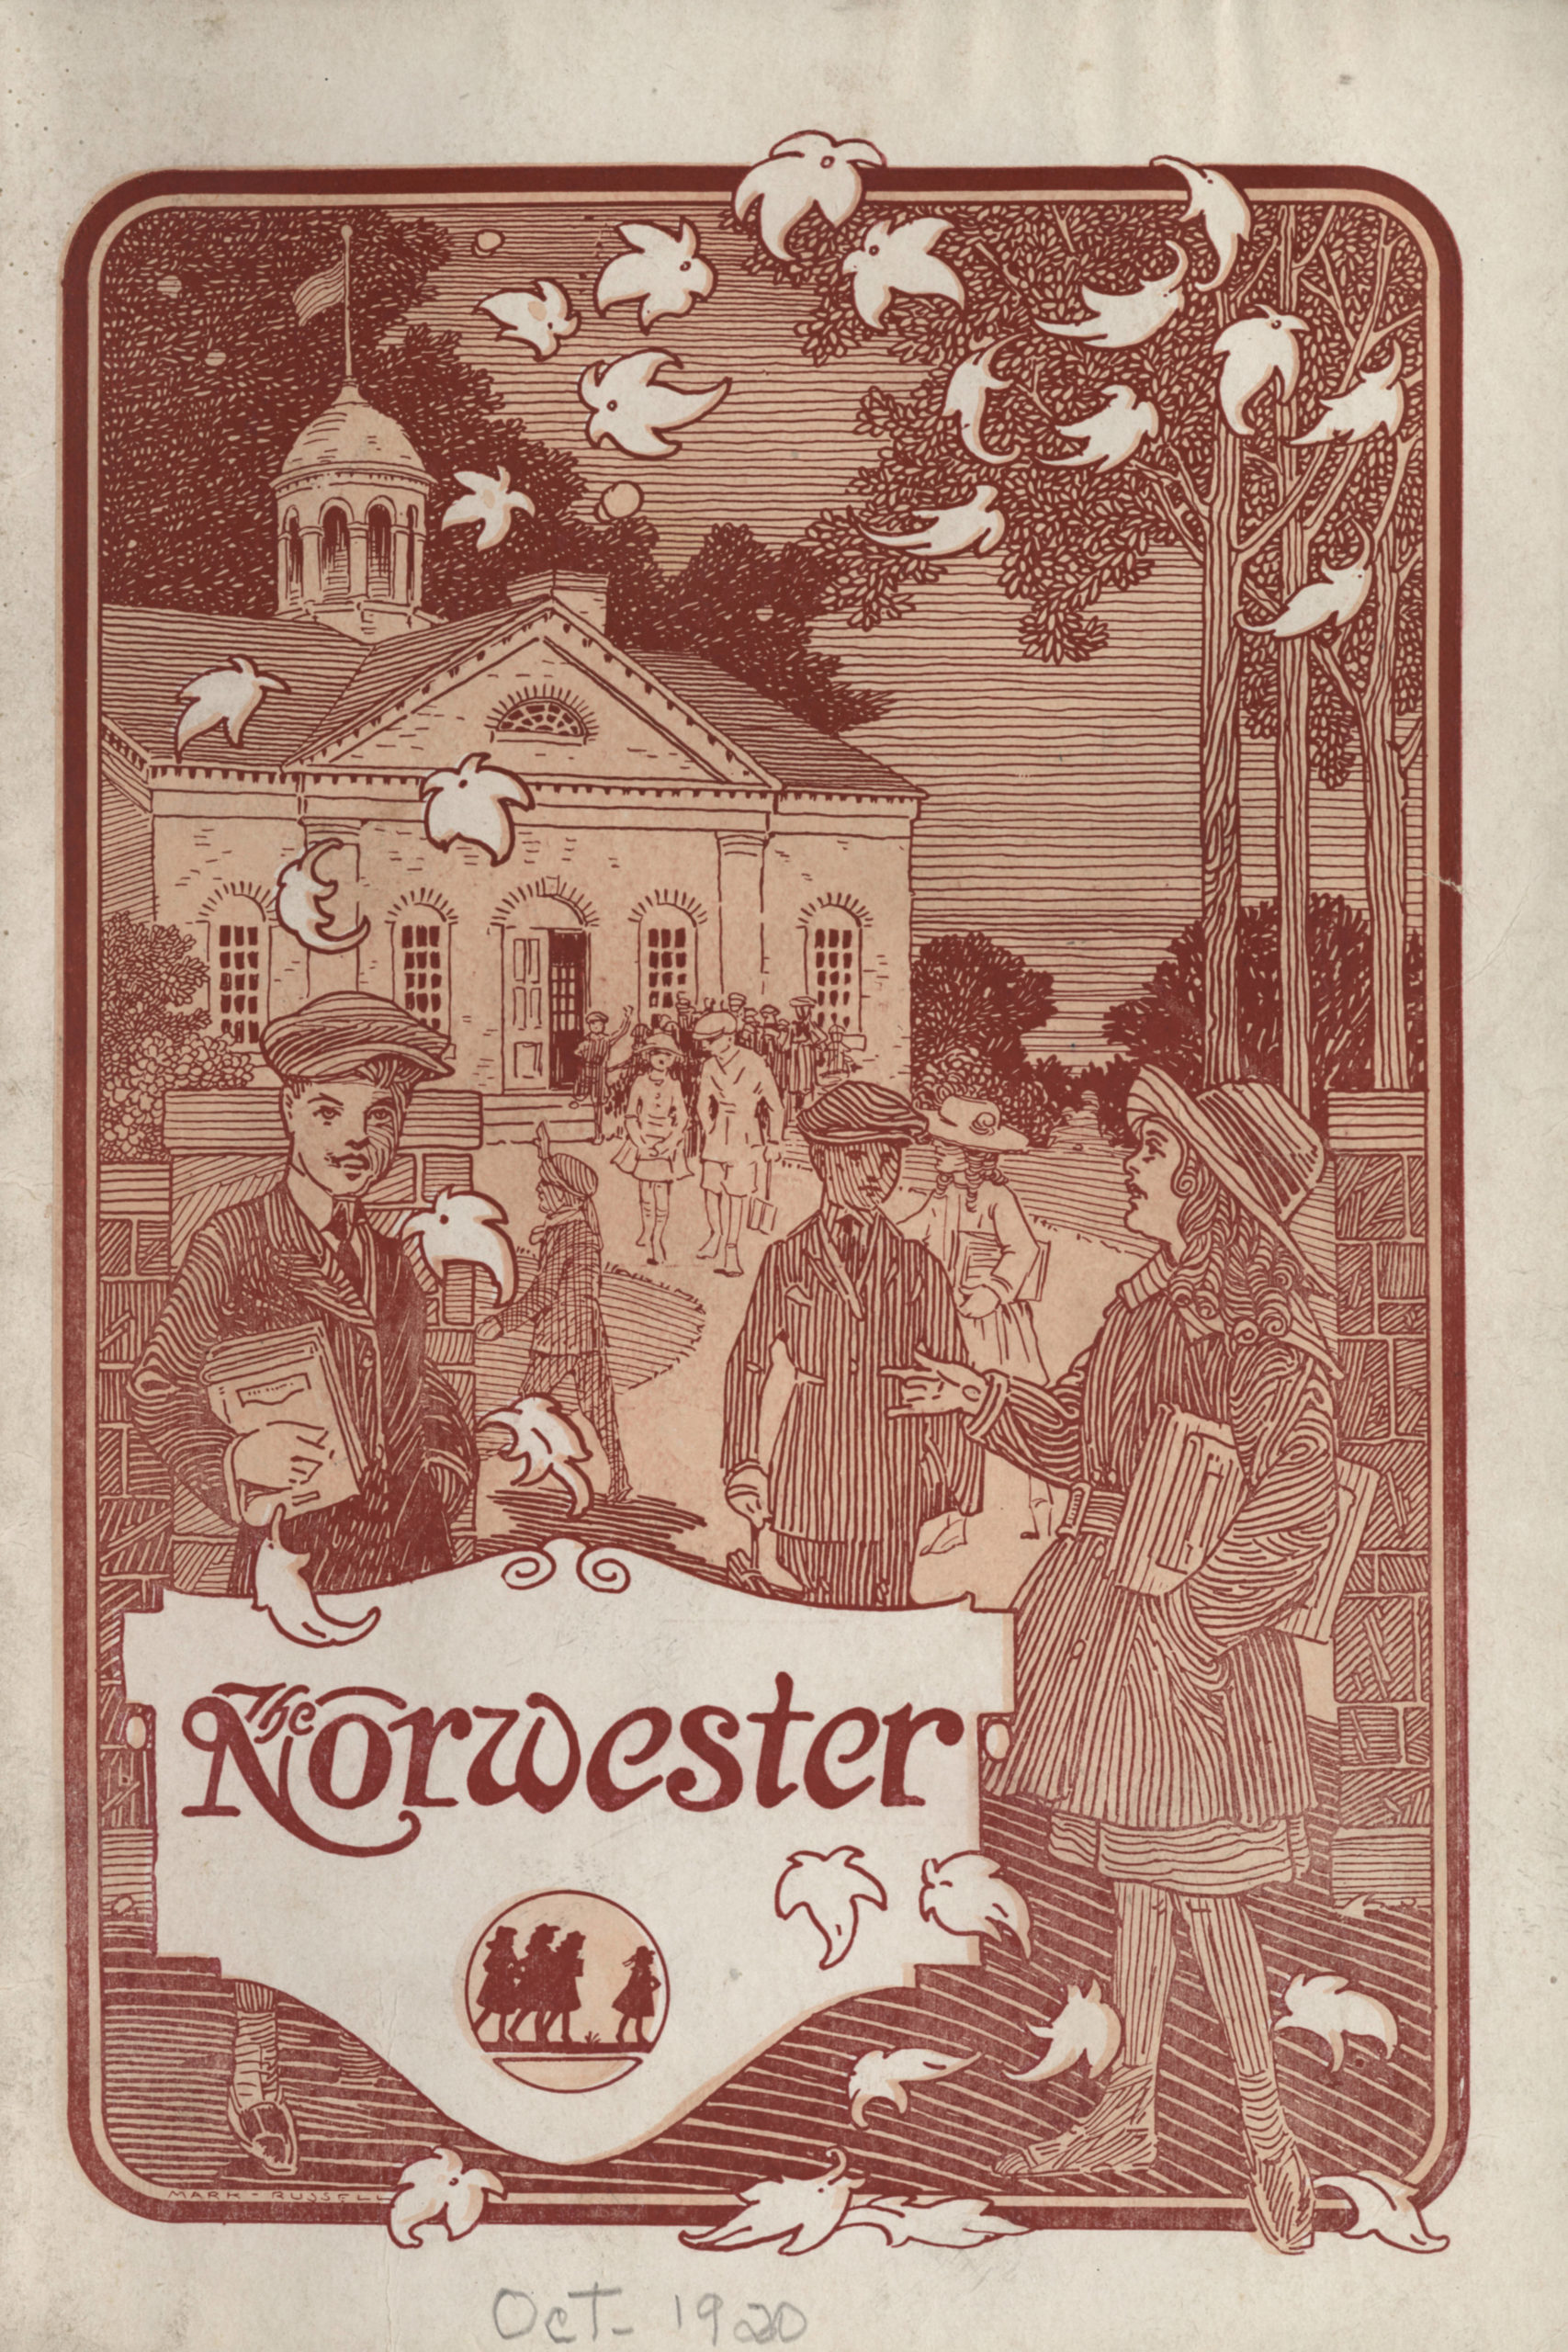 Printed cover of a newsletter illustration with people standing outside in an autumnal landscape